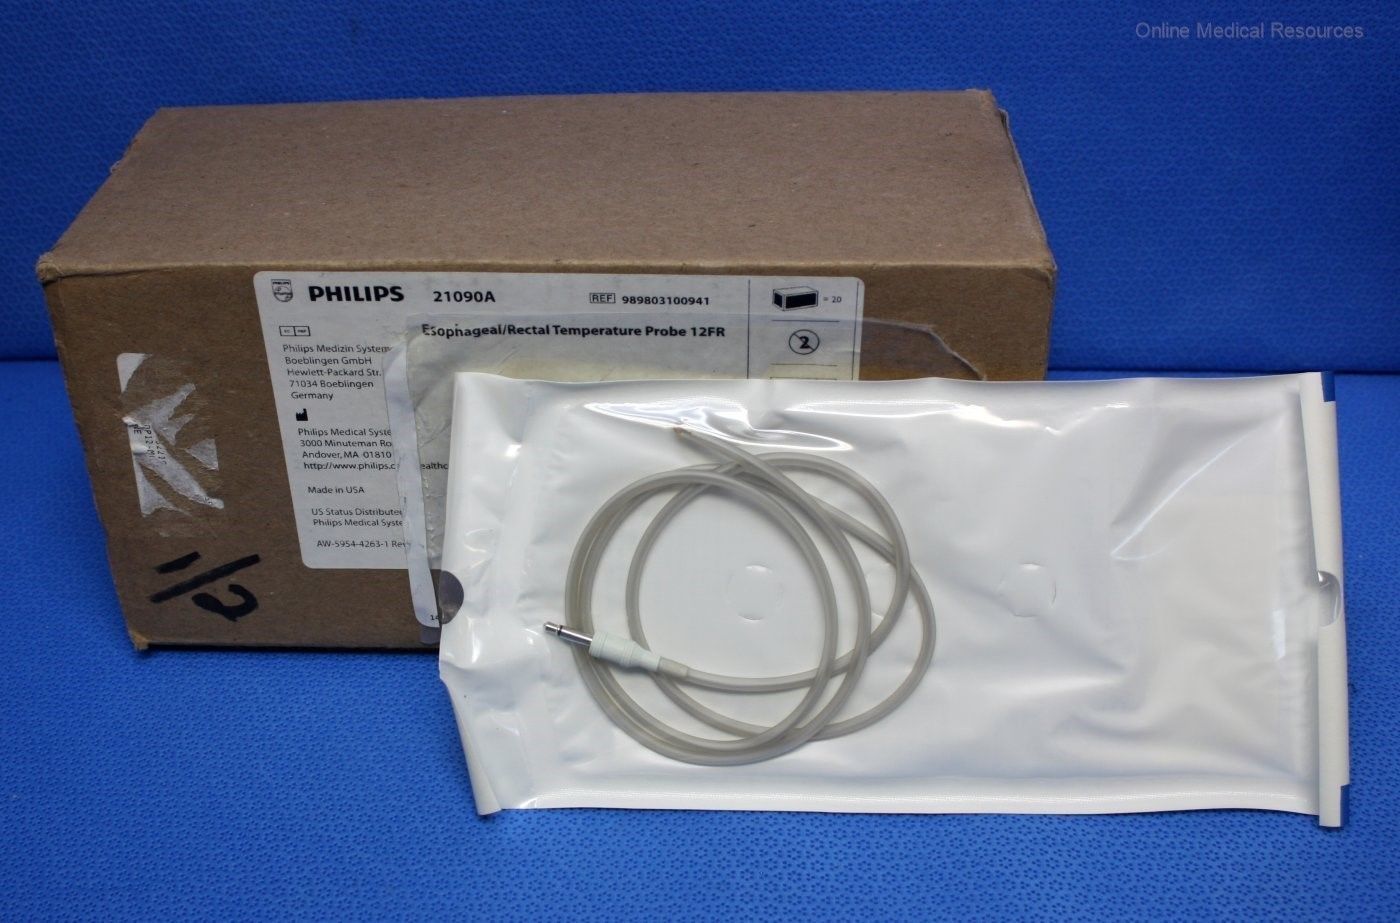 Philips 20 each Esophageal Rectal Temperature Probe 21090A Series 400 2017-06 DIAGNOSTIC ULTRASOUND MACHINES FOR SALE